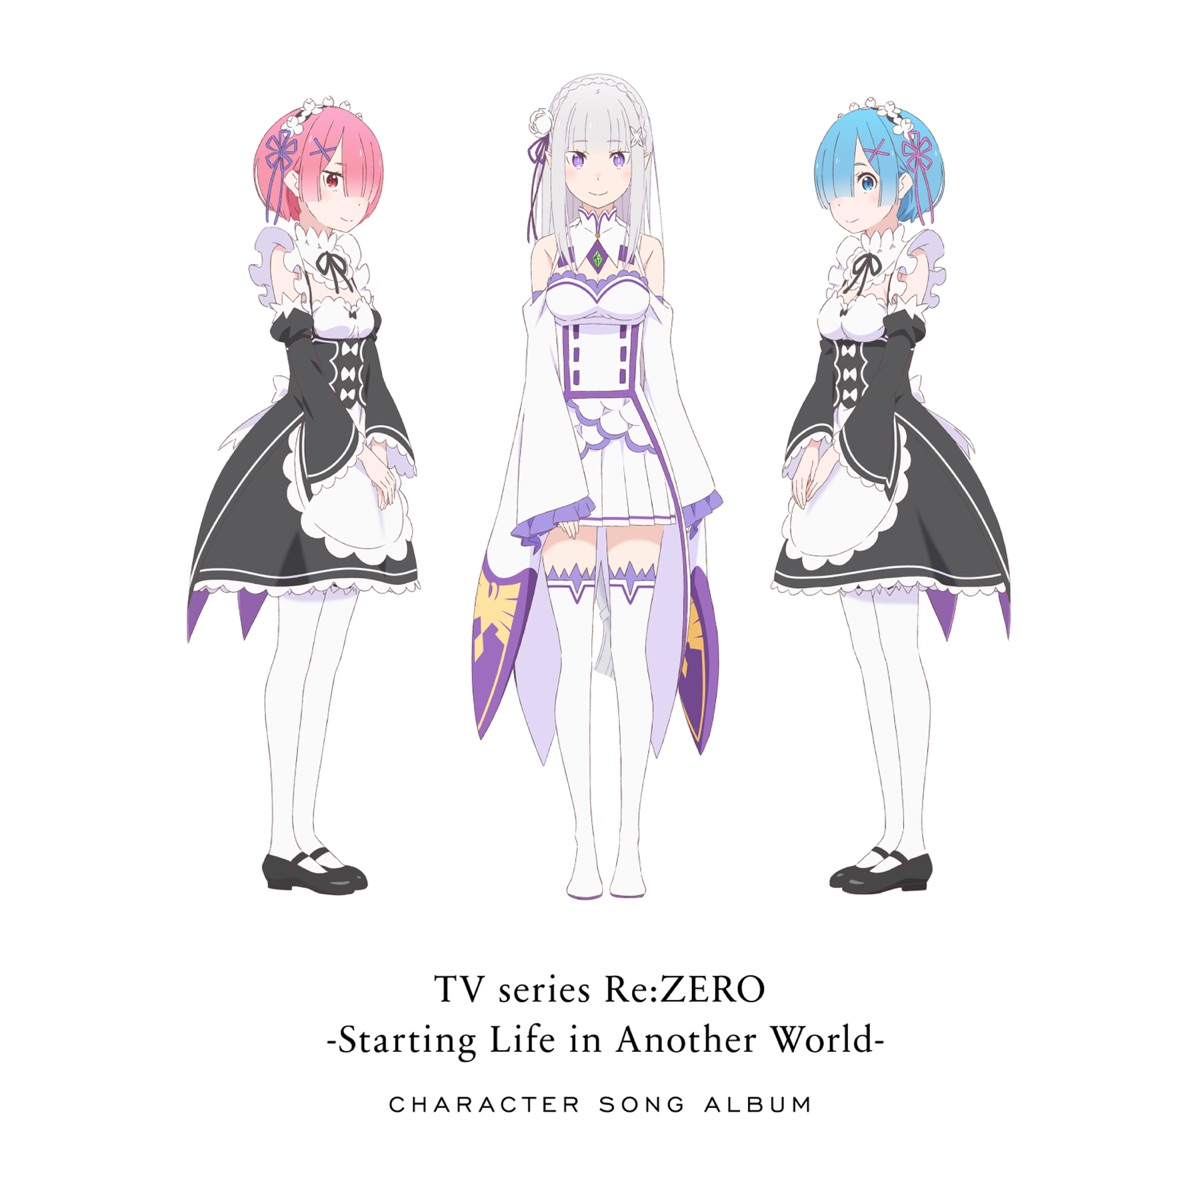 Cover art for『Rem (Inori Minase) - Wishing』from the release『Re:ZERO -Starting Life in Another World- Character Song Album